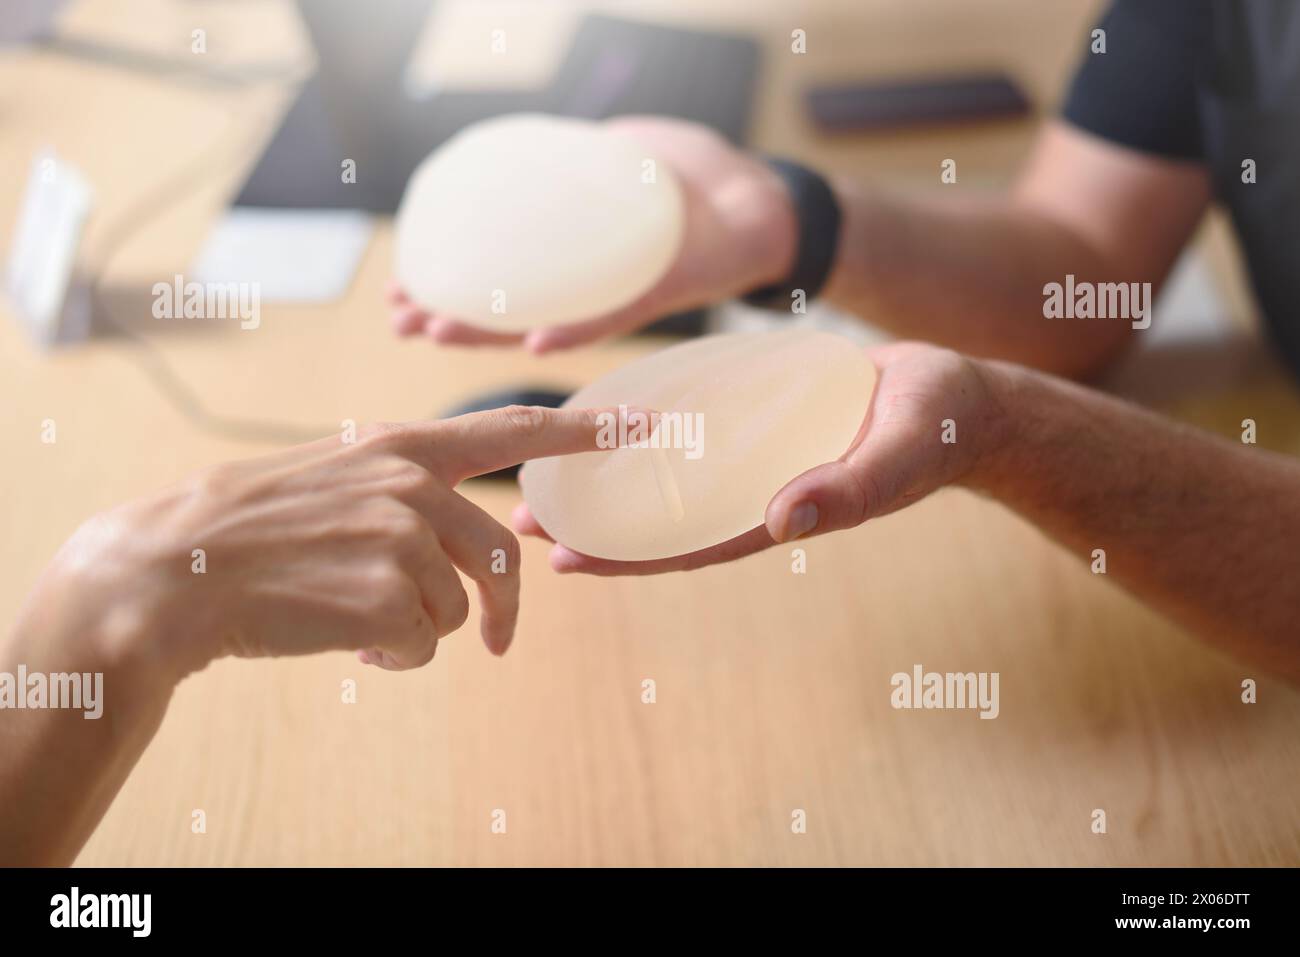 Female hand picks silicone implants for breast augmentation. Stock Photo